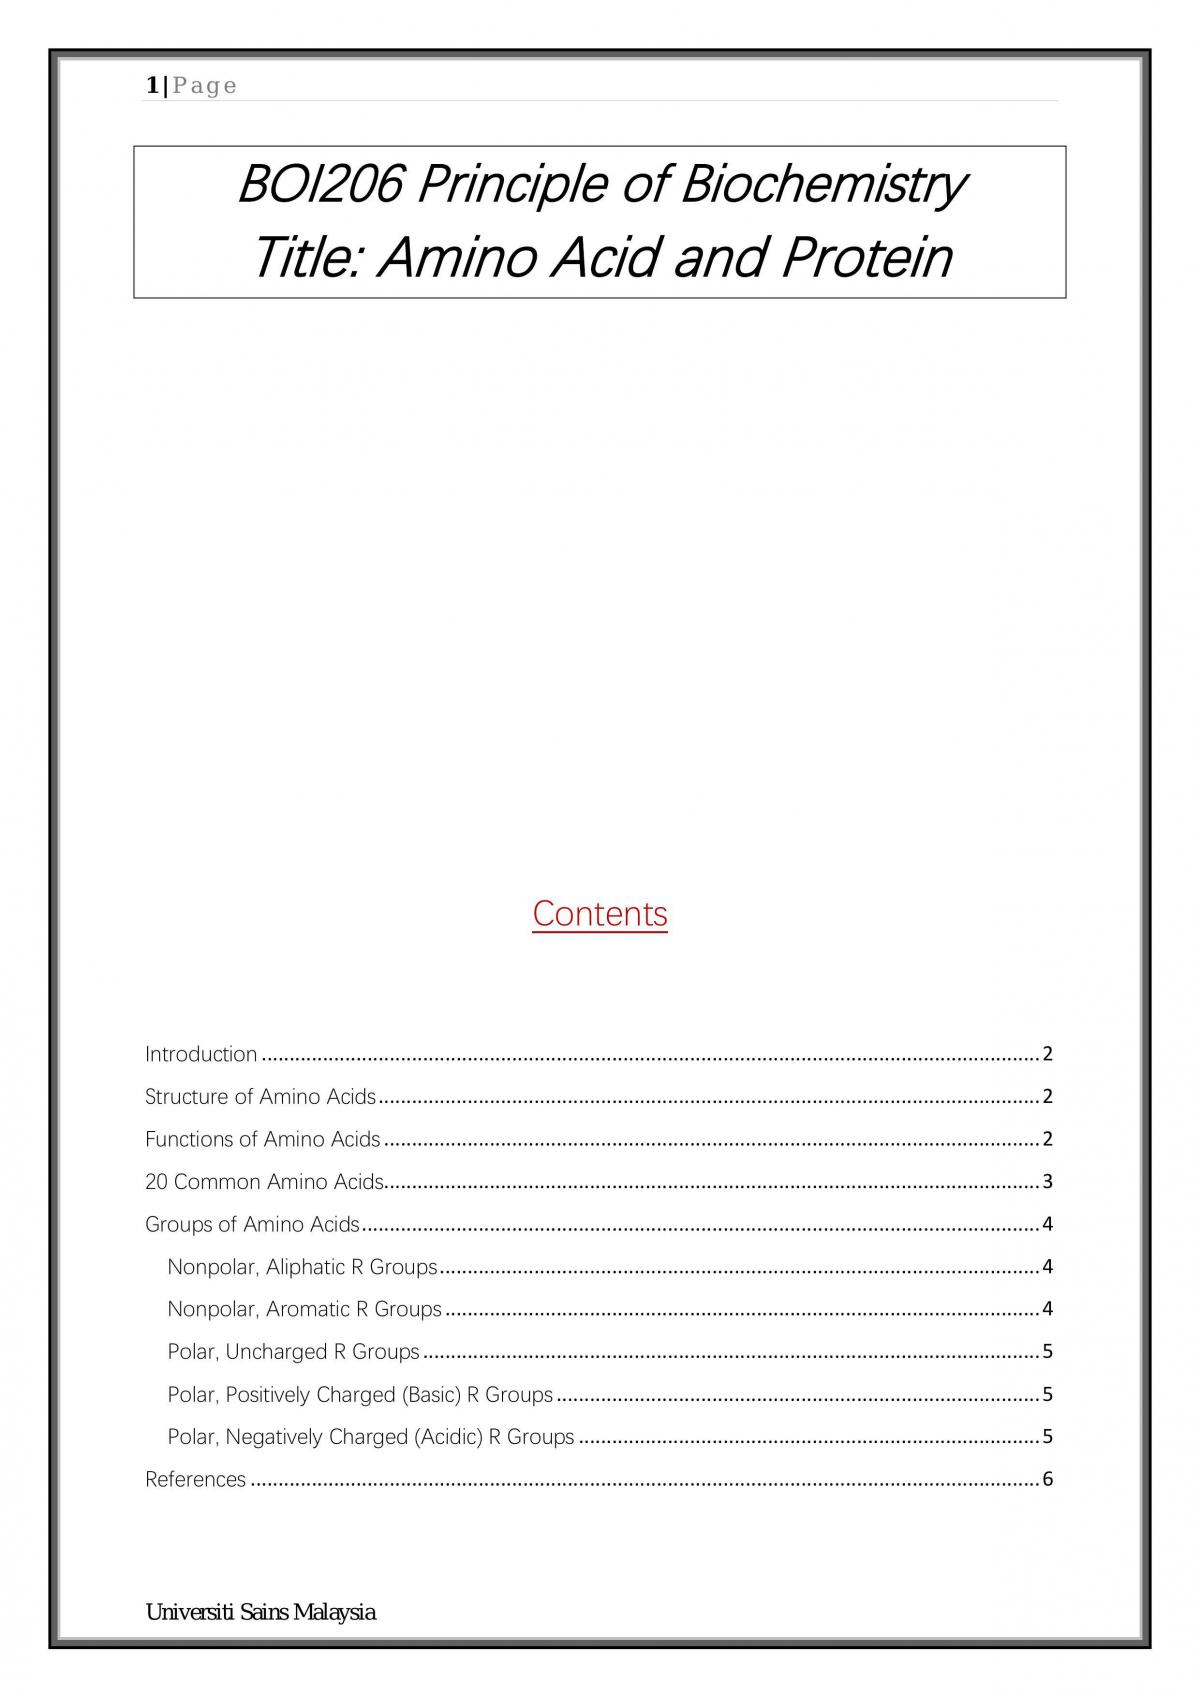 Amino Acid and Protein - Page 1